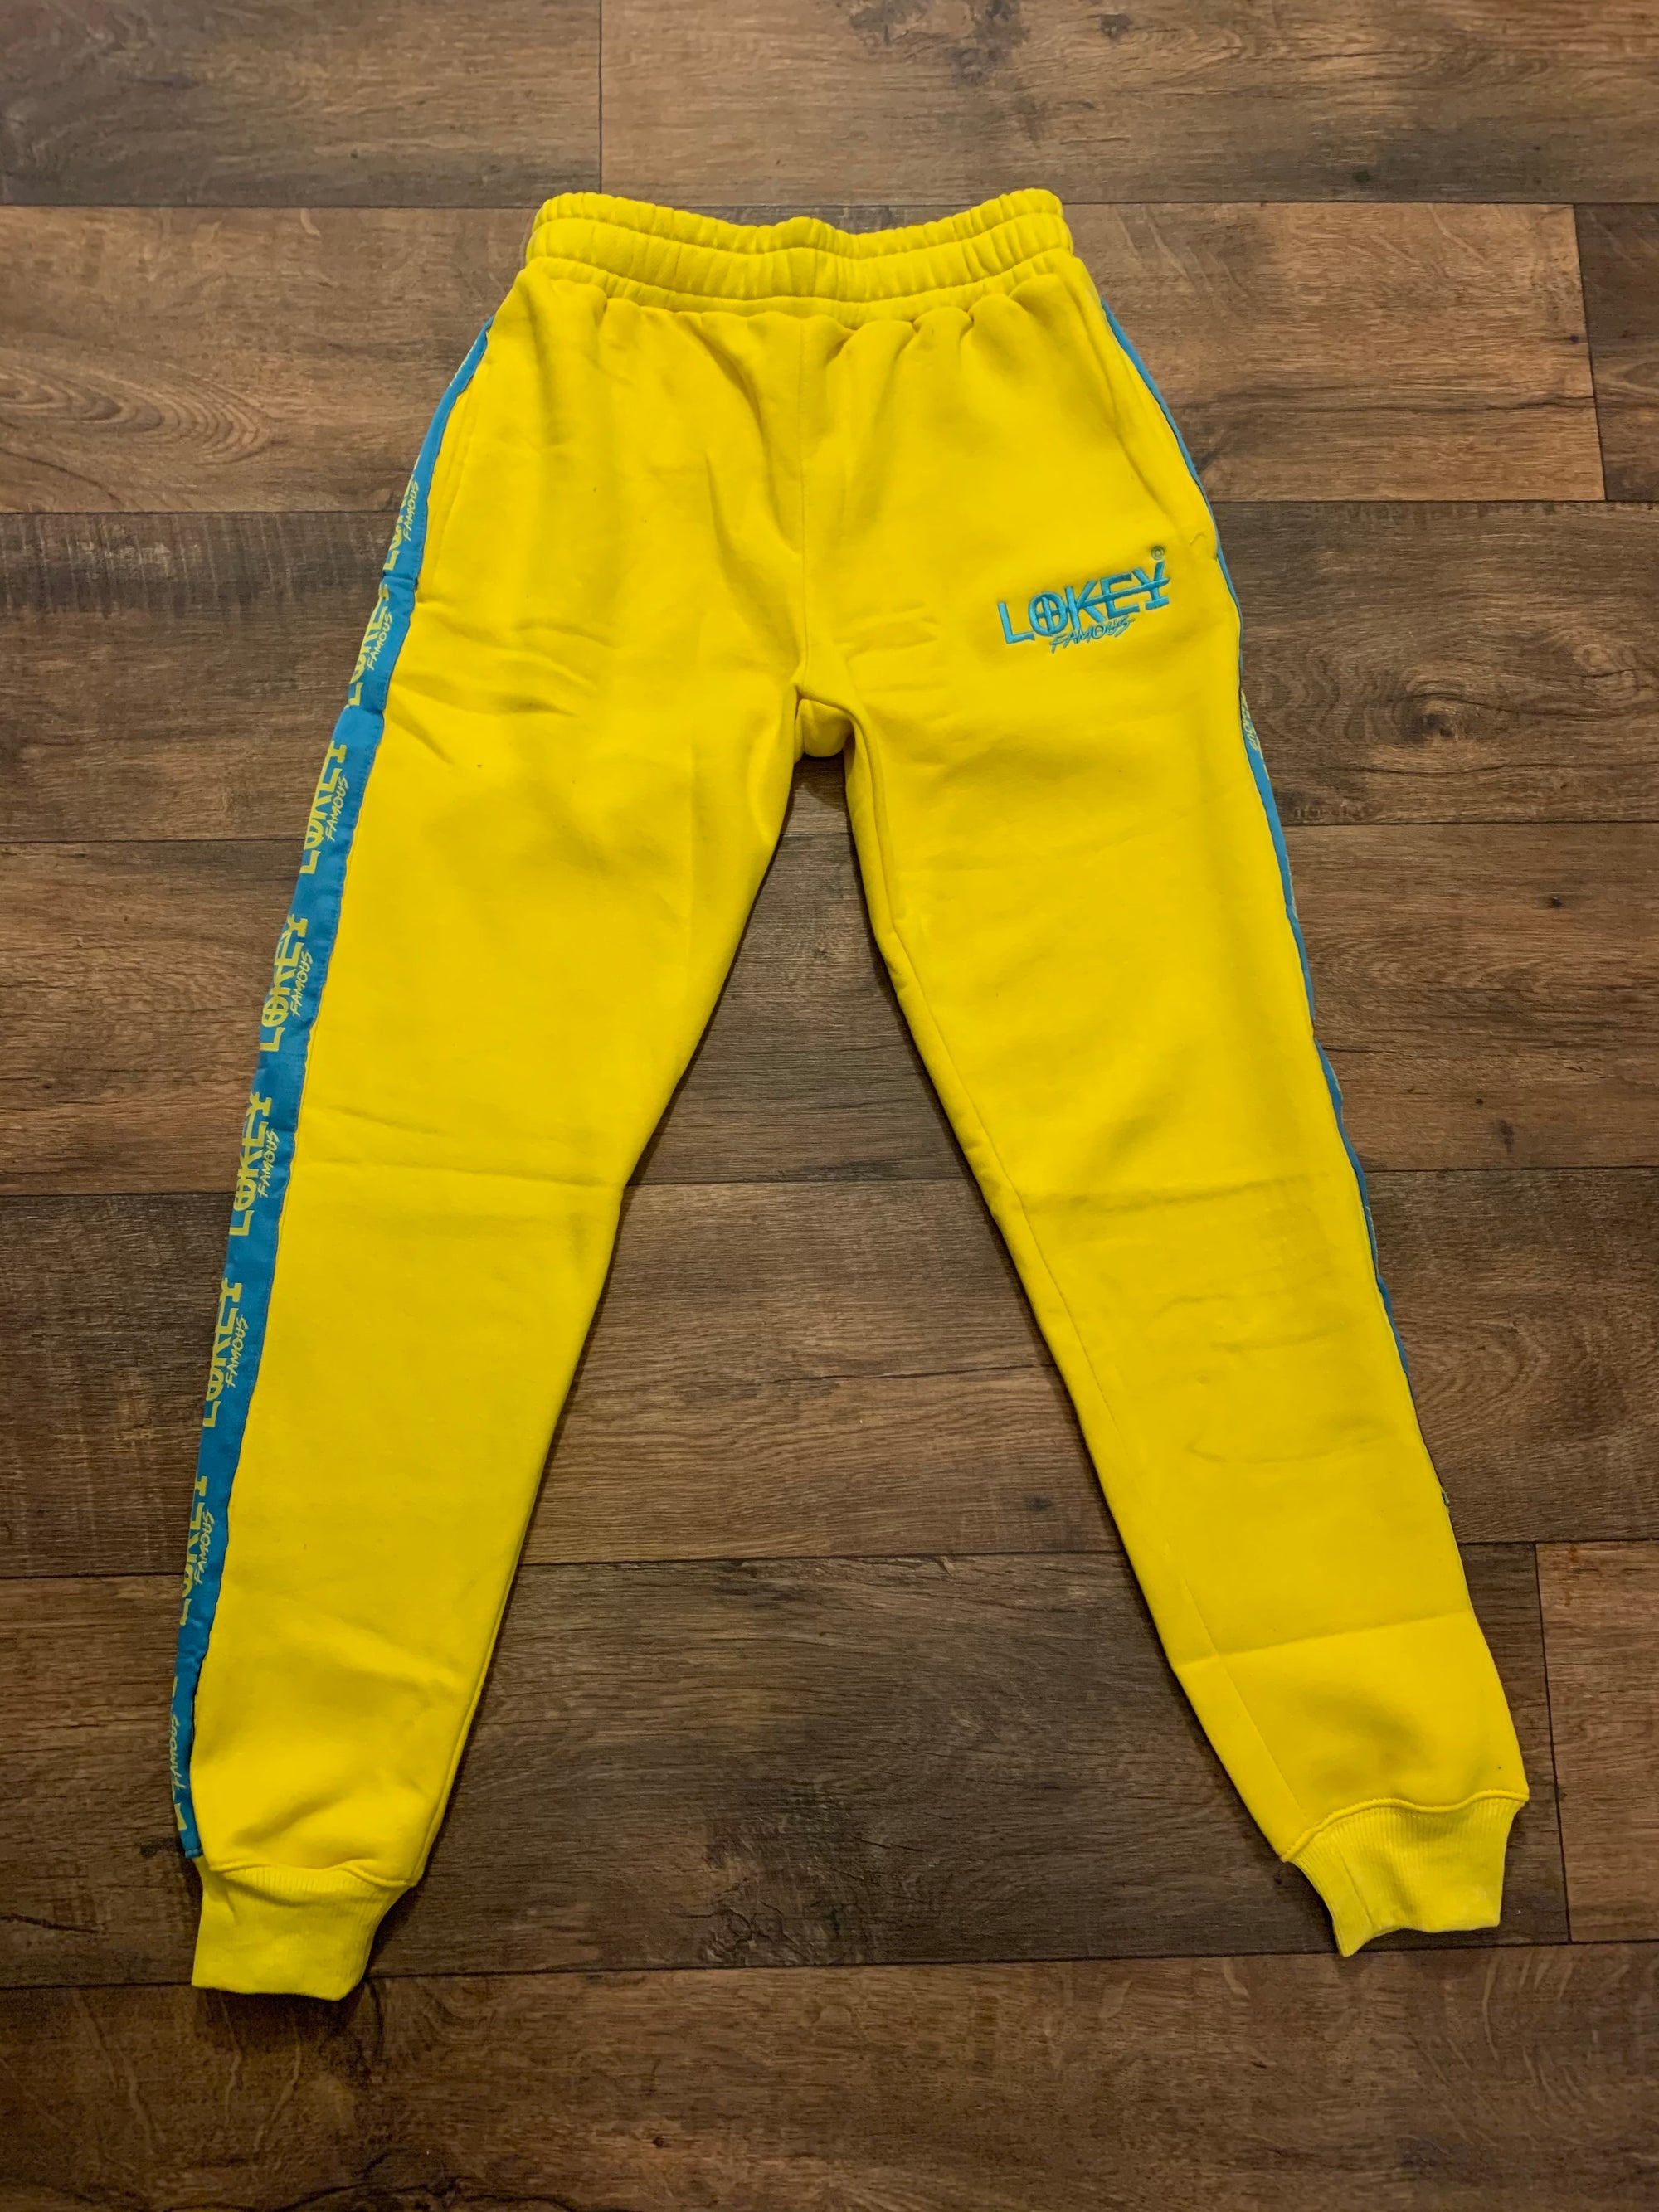 Yellow sweatpants with teal stripe